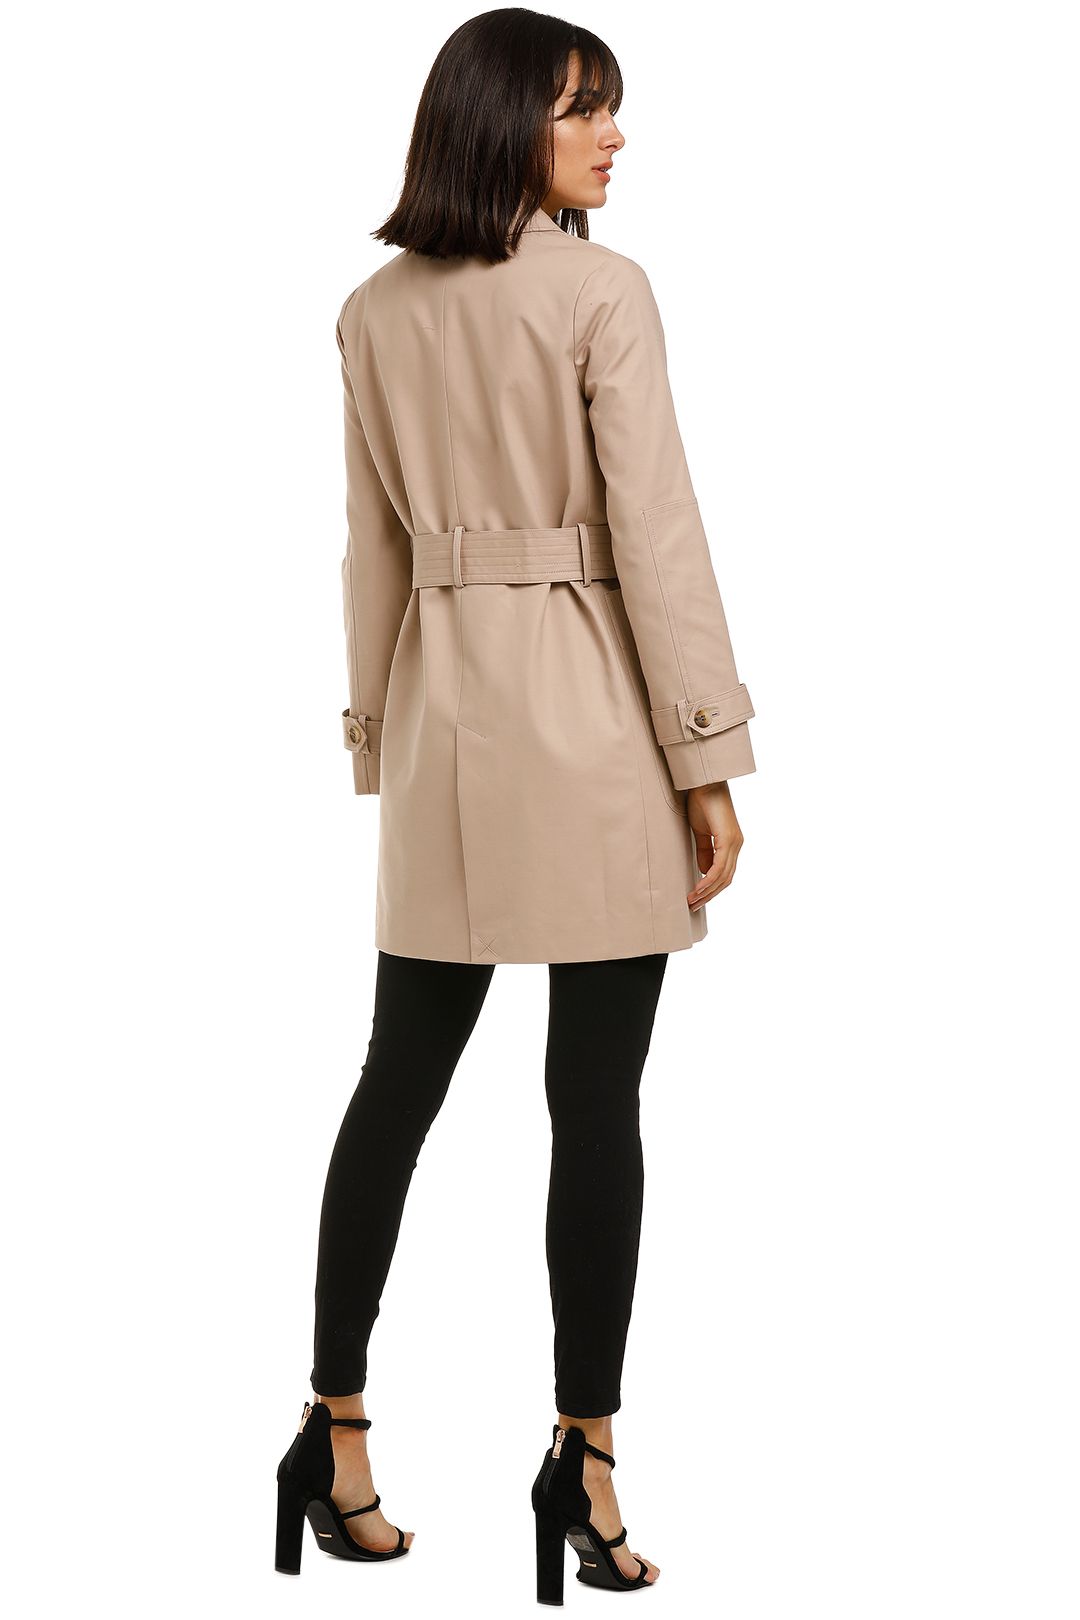 Whistles-Classic-Trench-Coat-Neural-Back